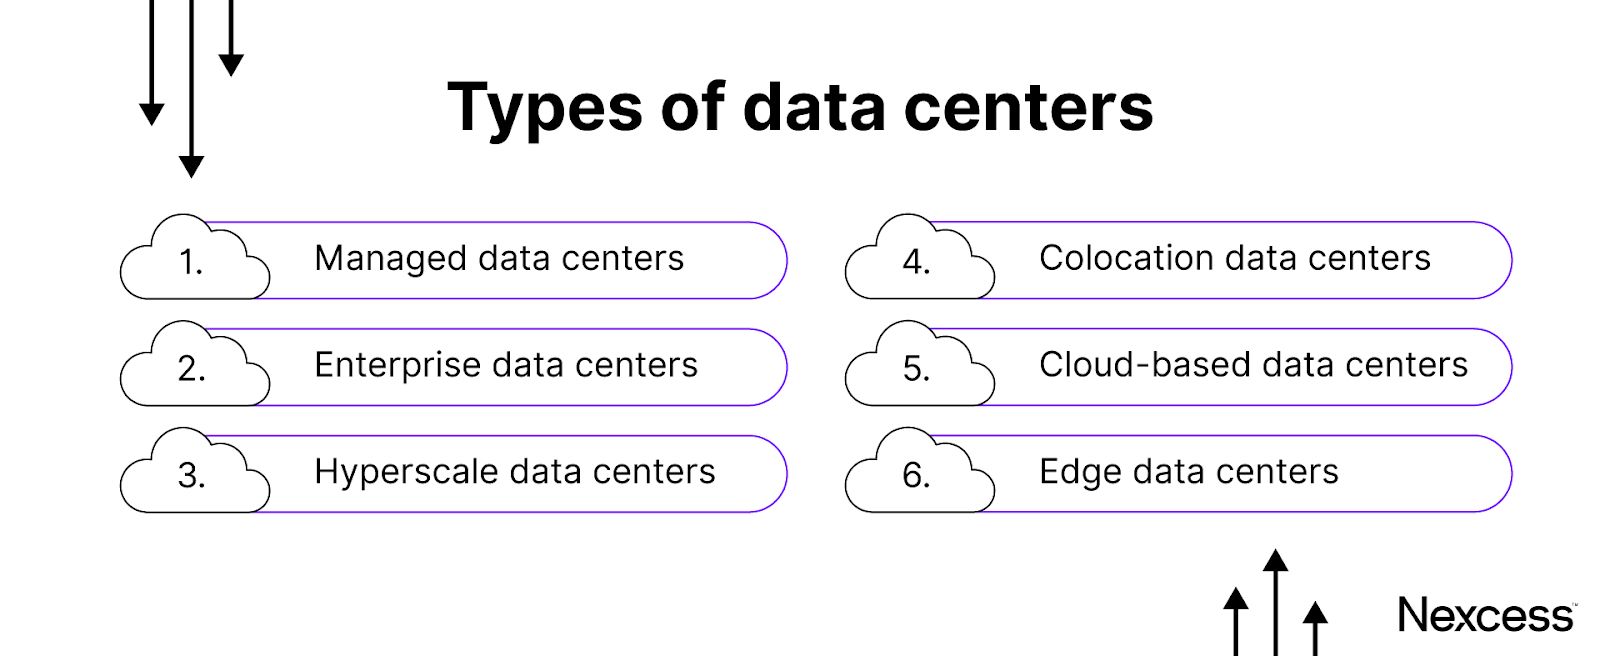 Types of data centers. 